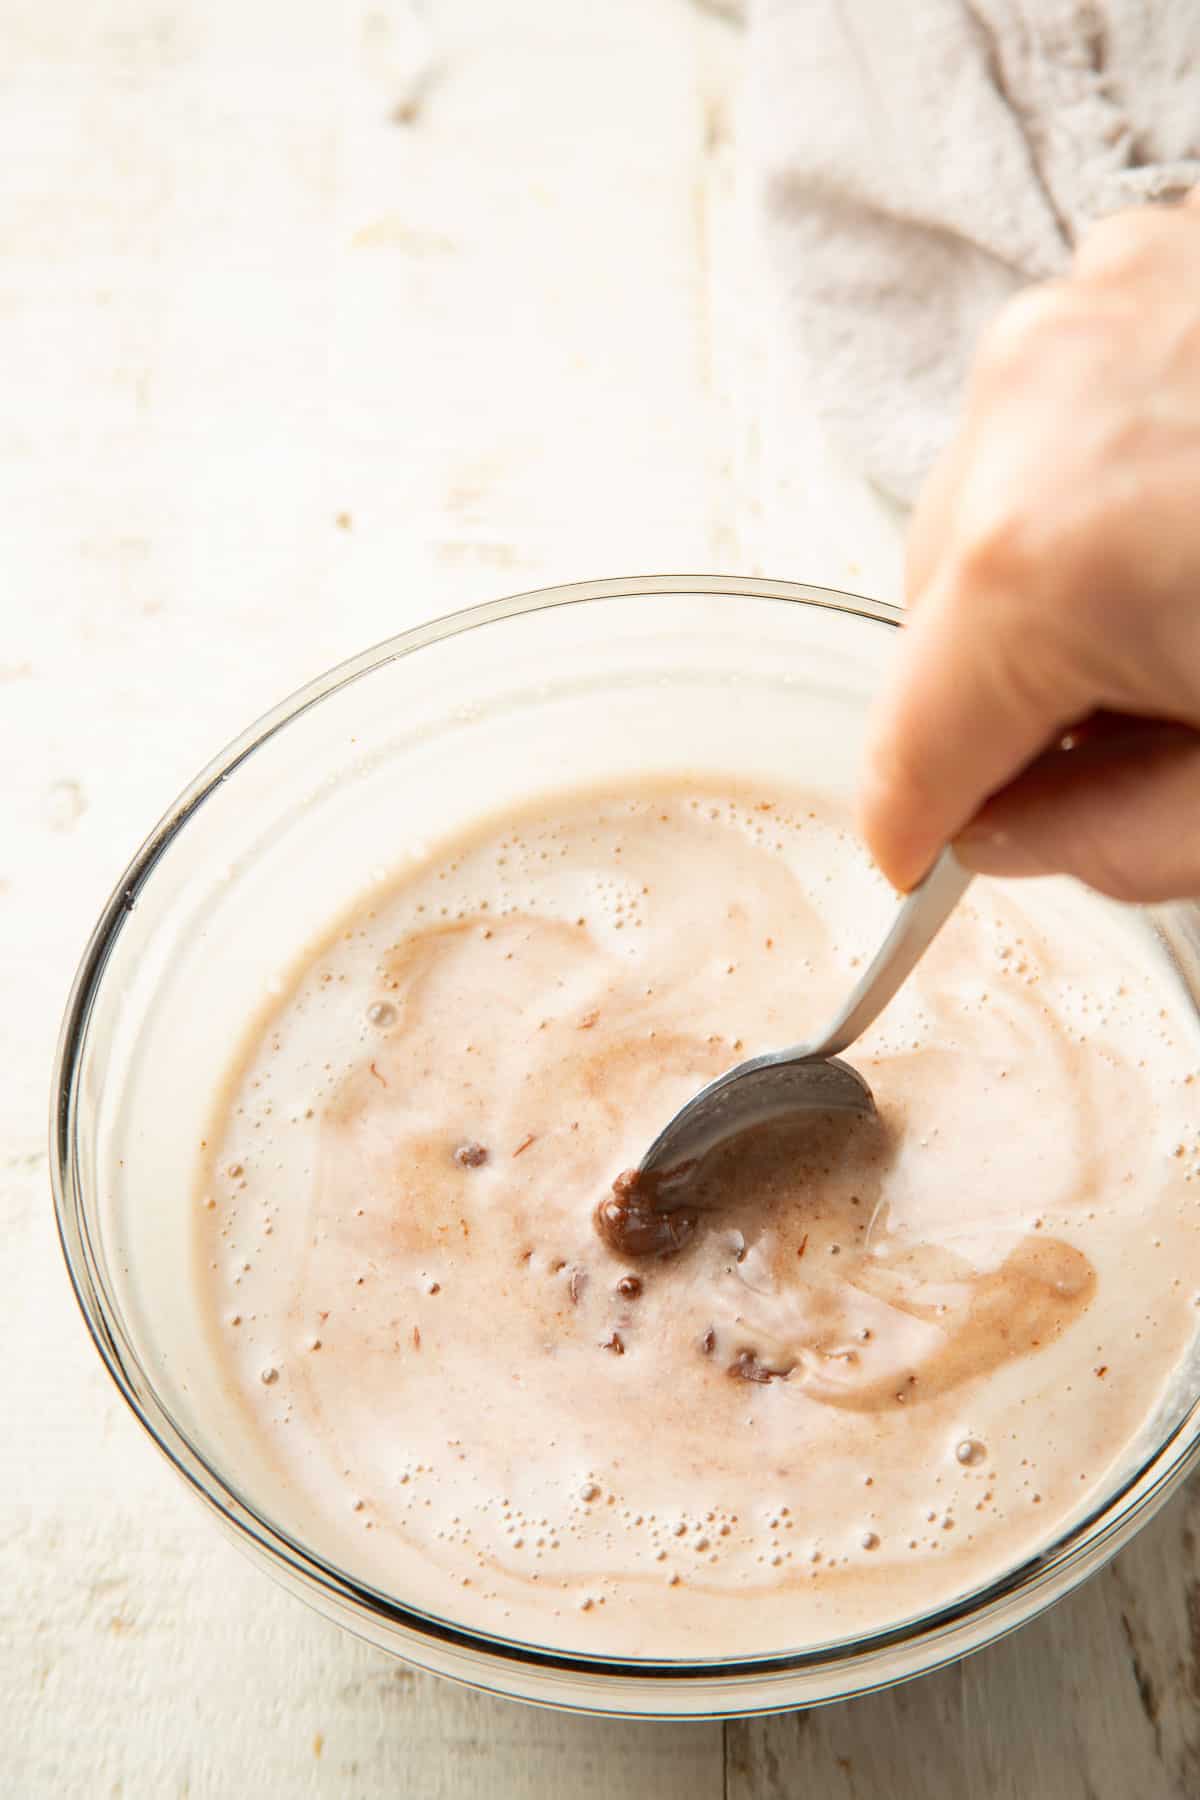 Hand stirring coconut milk and chocolate together in a bowl.